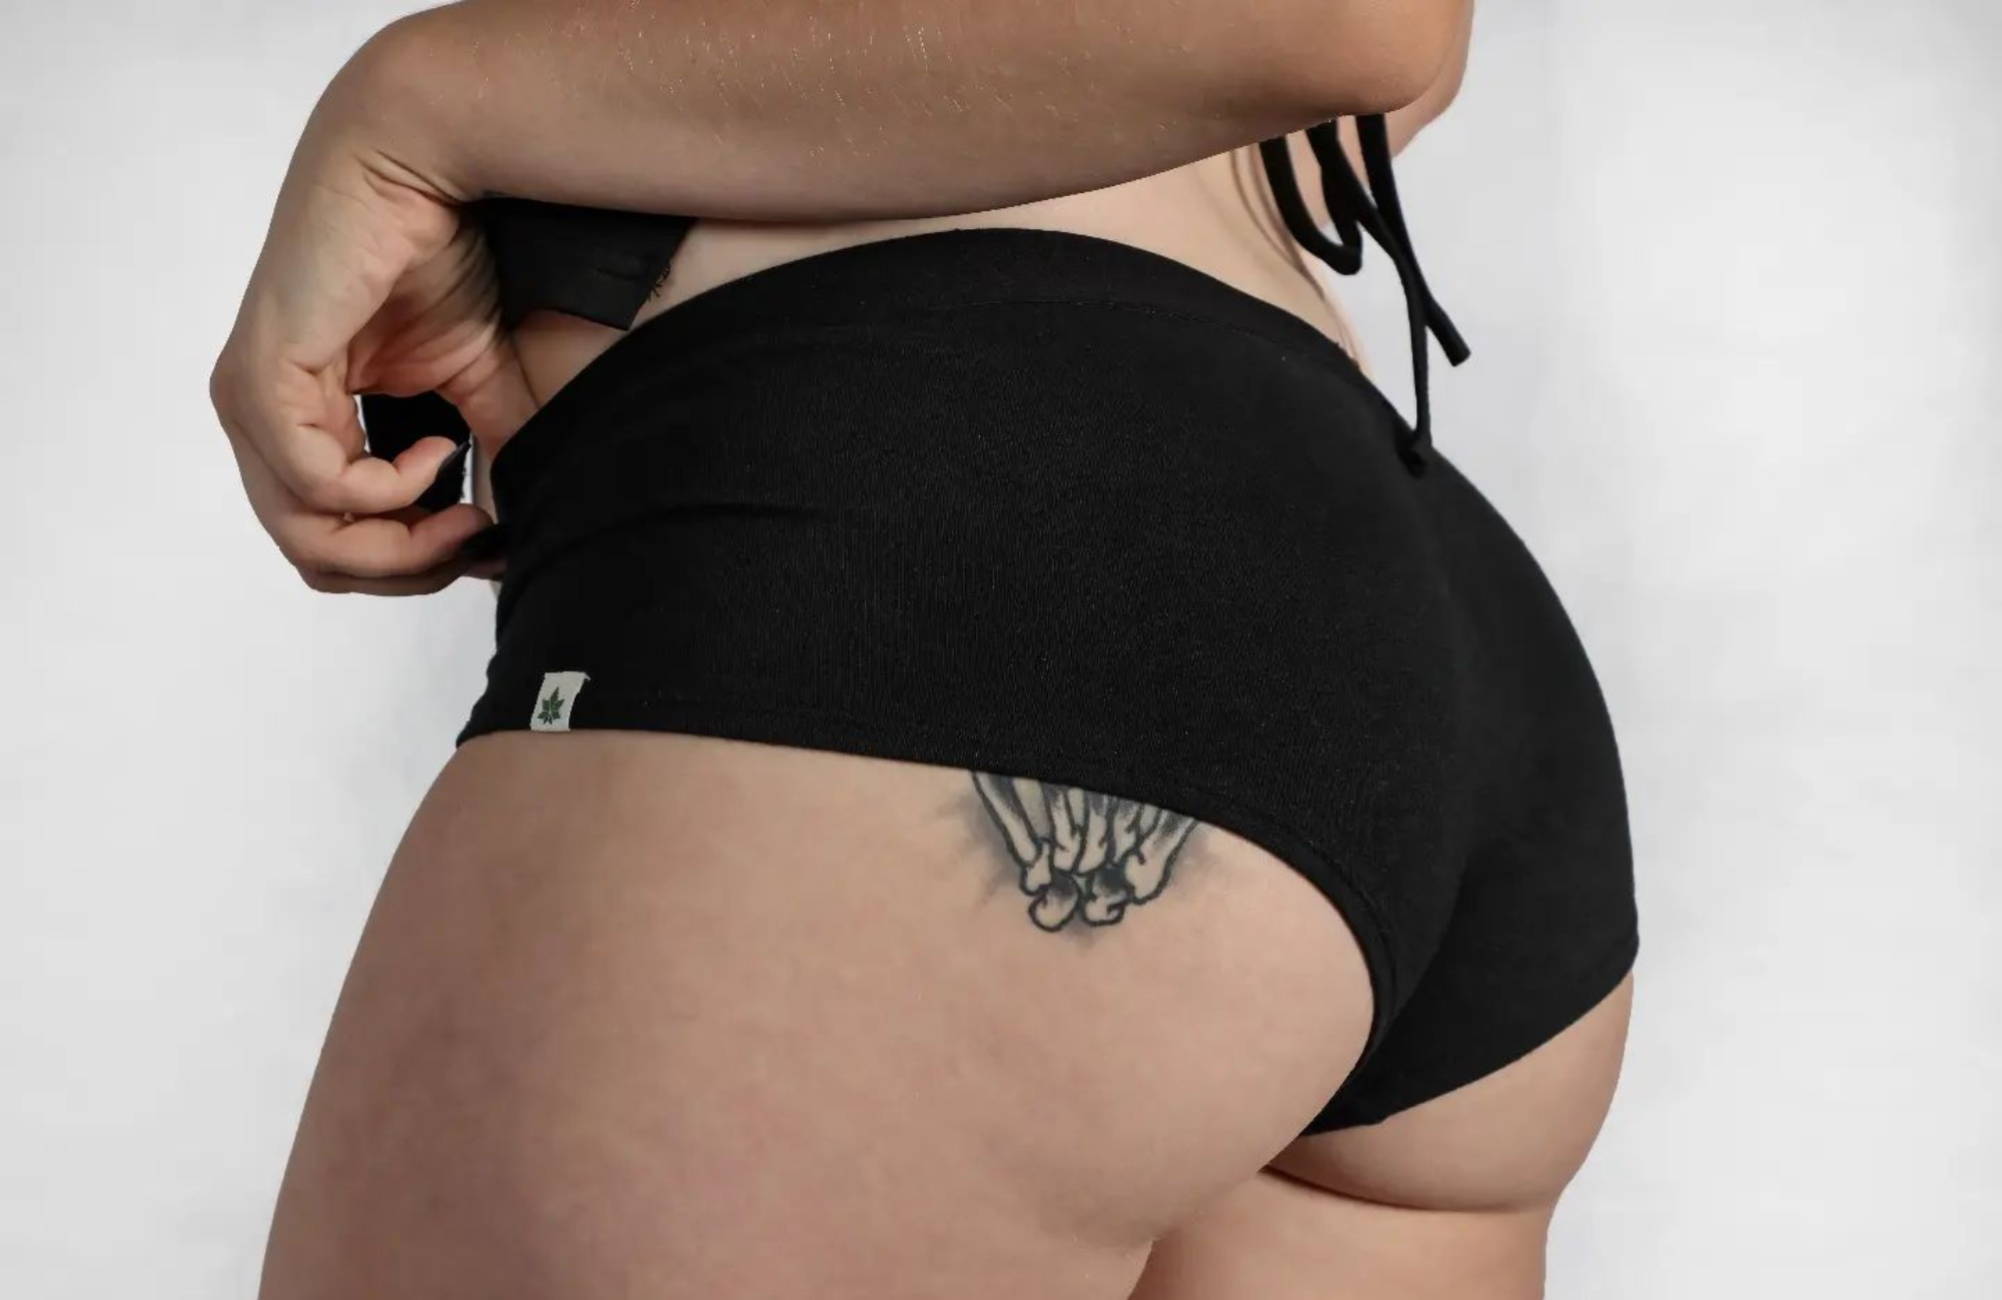 anna leda recommends booty shorts no panties pic